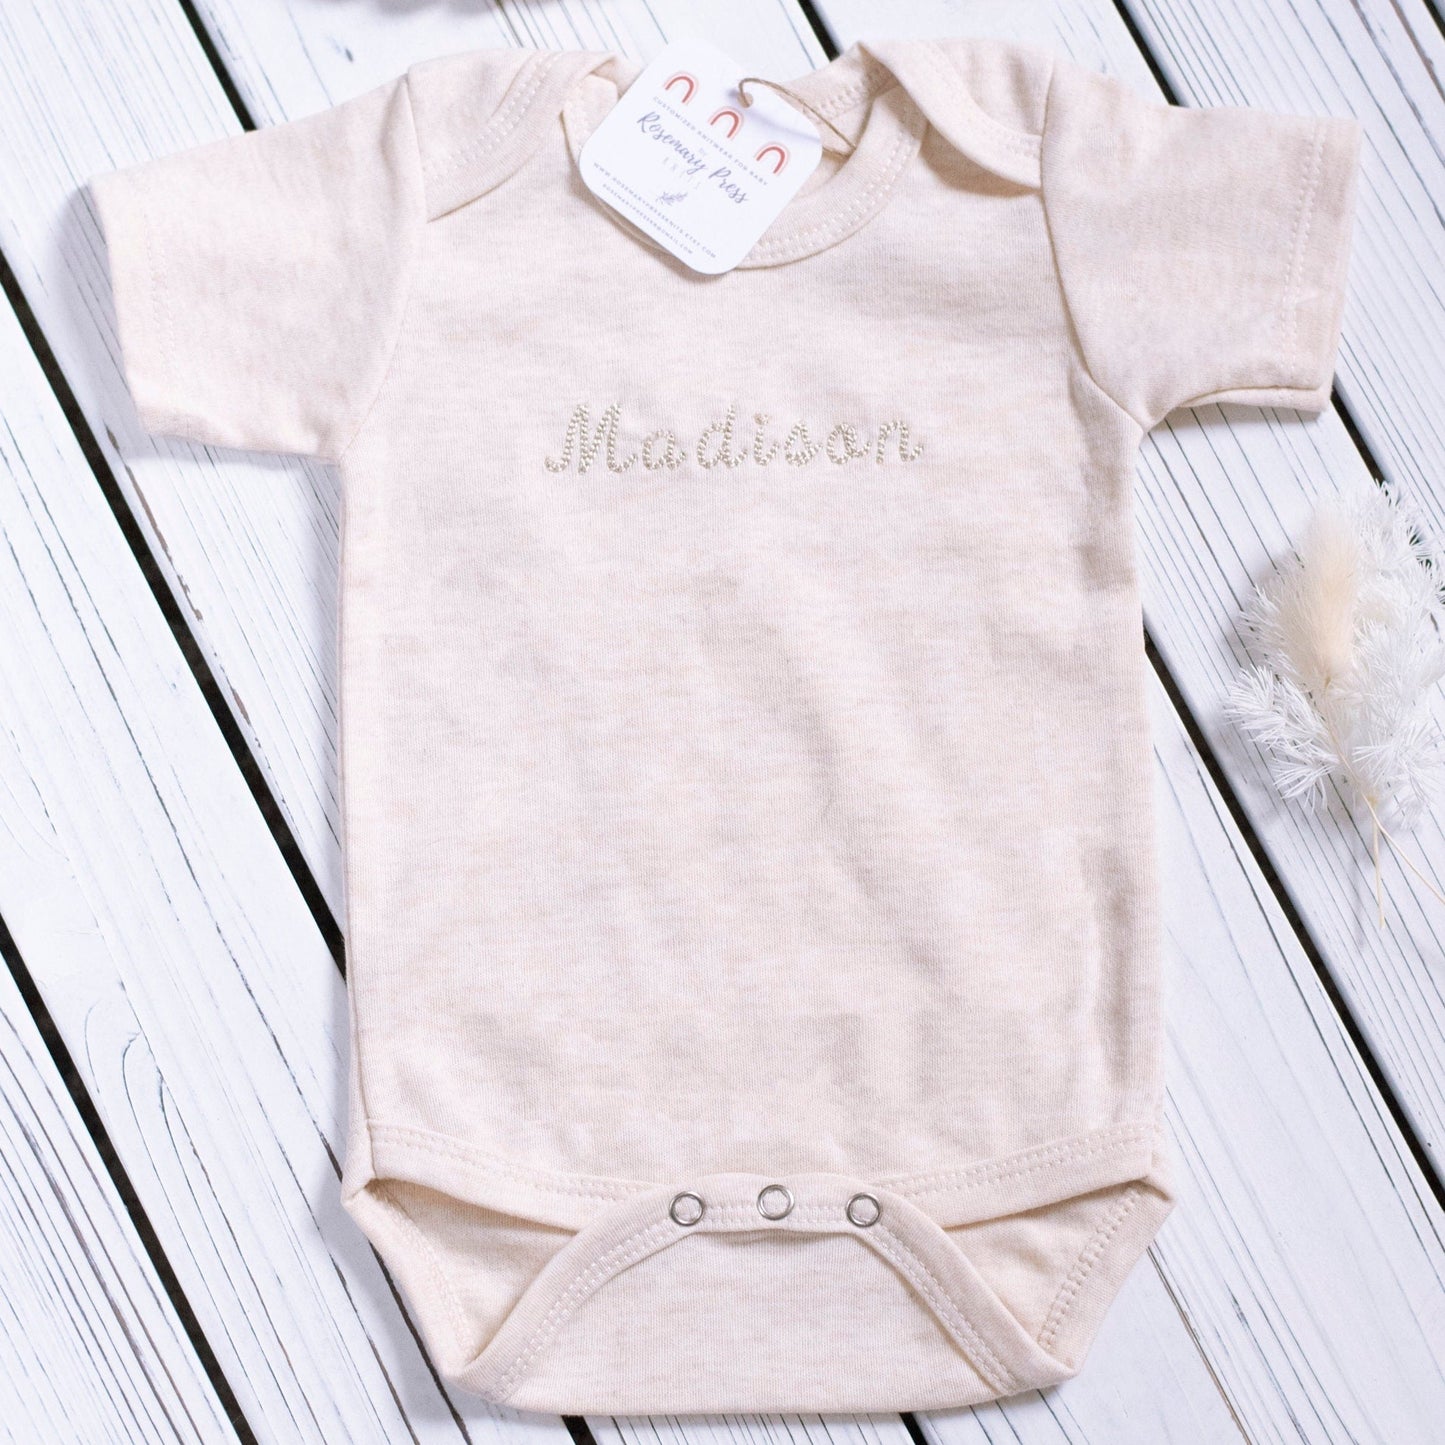 Baby Name Bodysuit Short-Sleeve, 0-to-3 Months